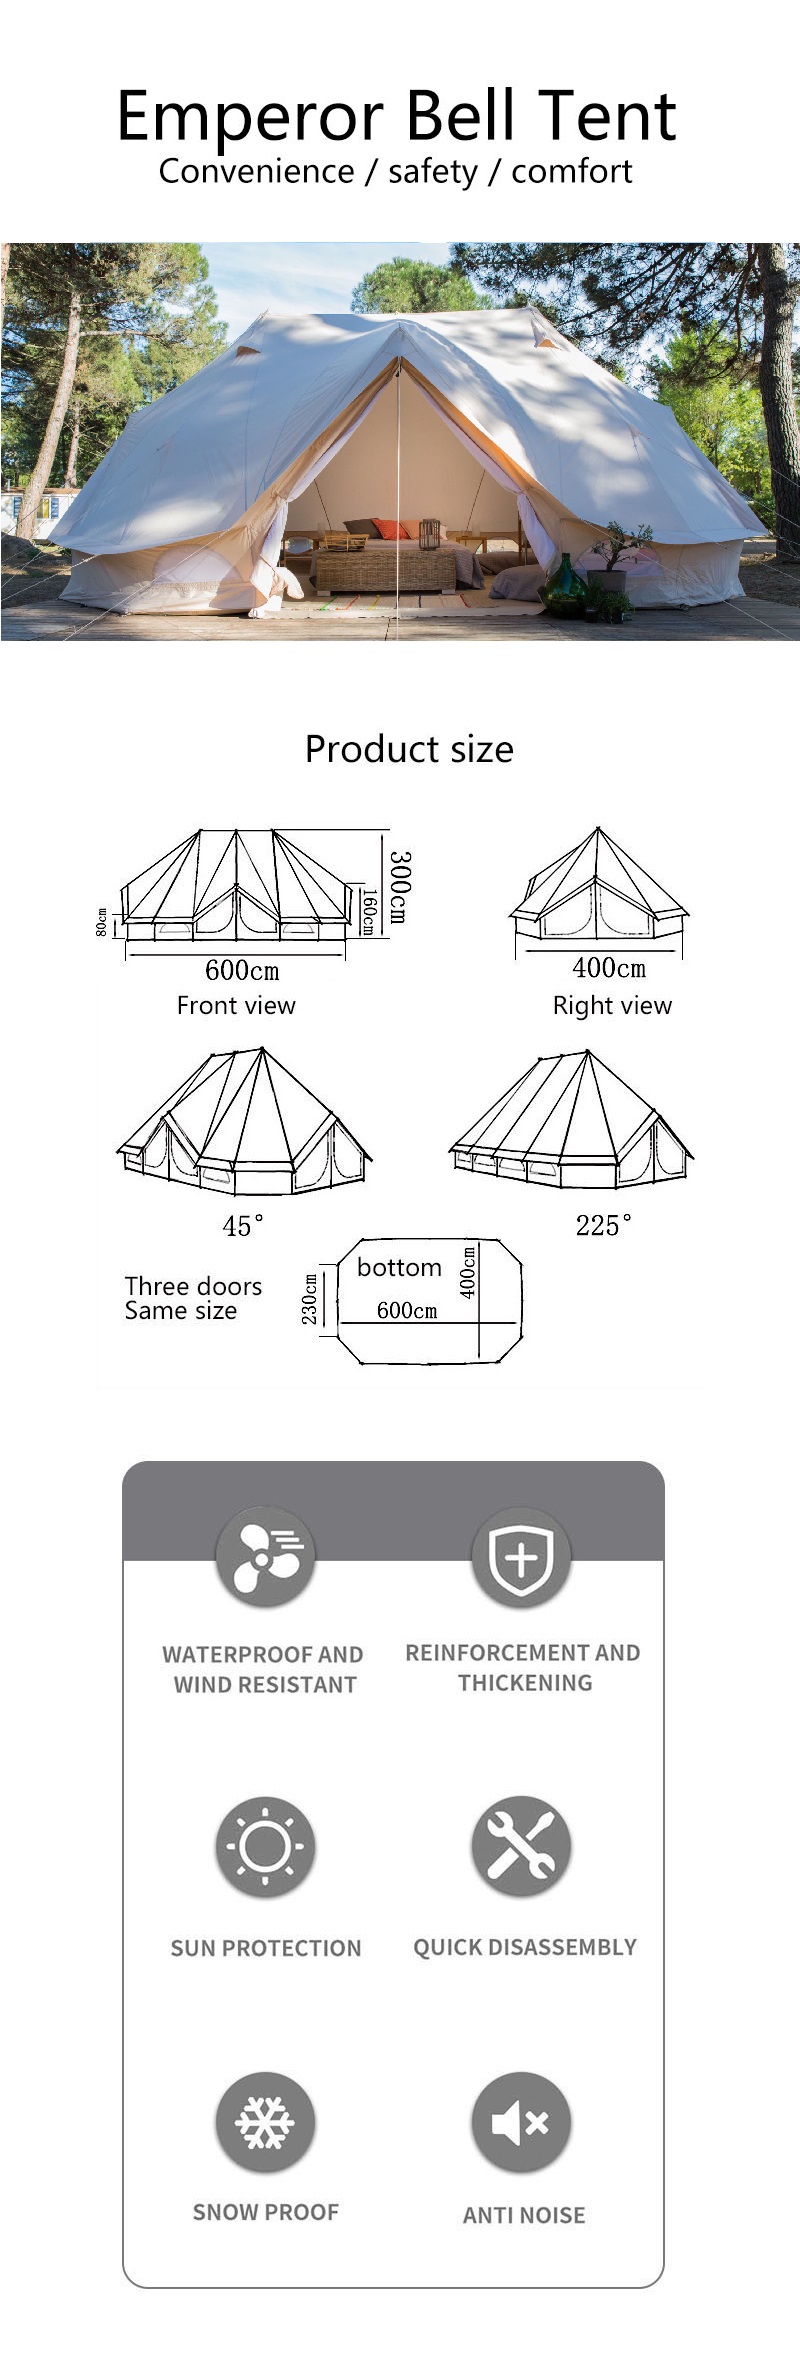 RCT0202 Emperor Bell Tent 1画板 1 - 副本